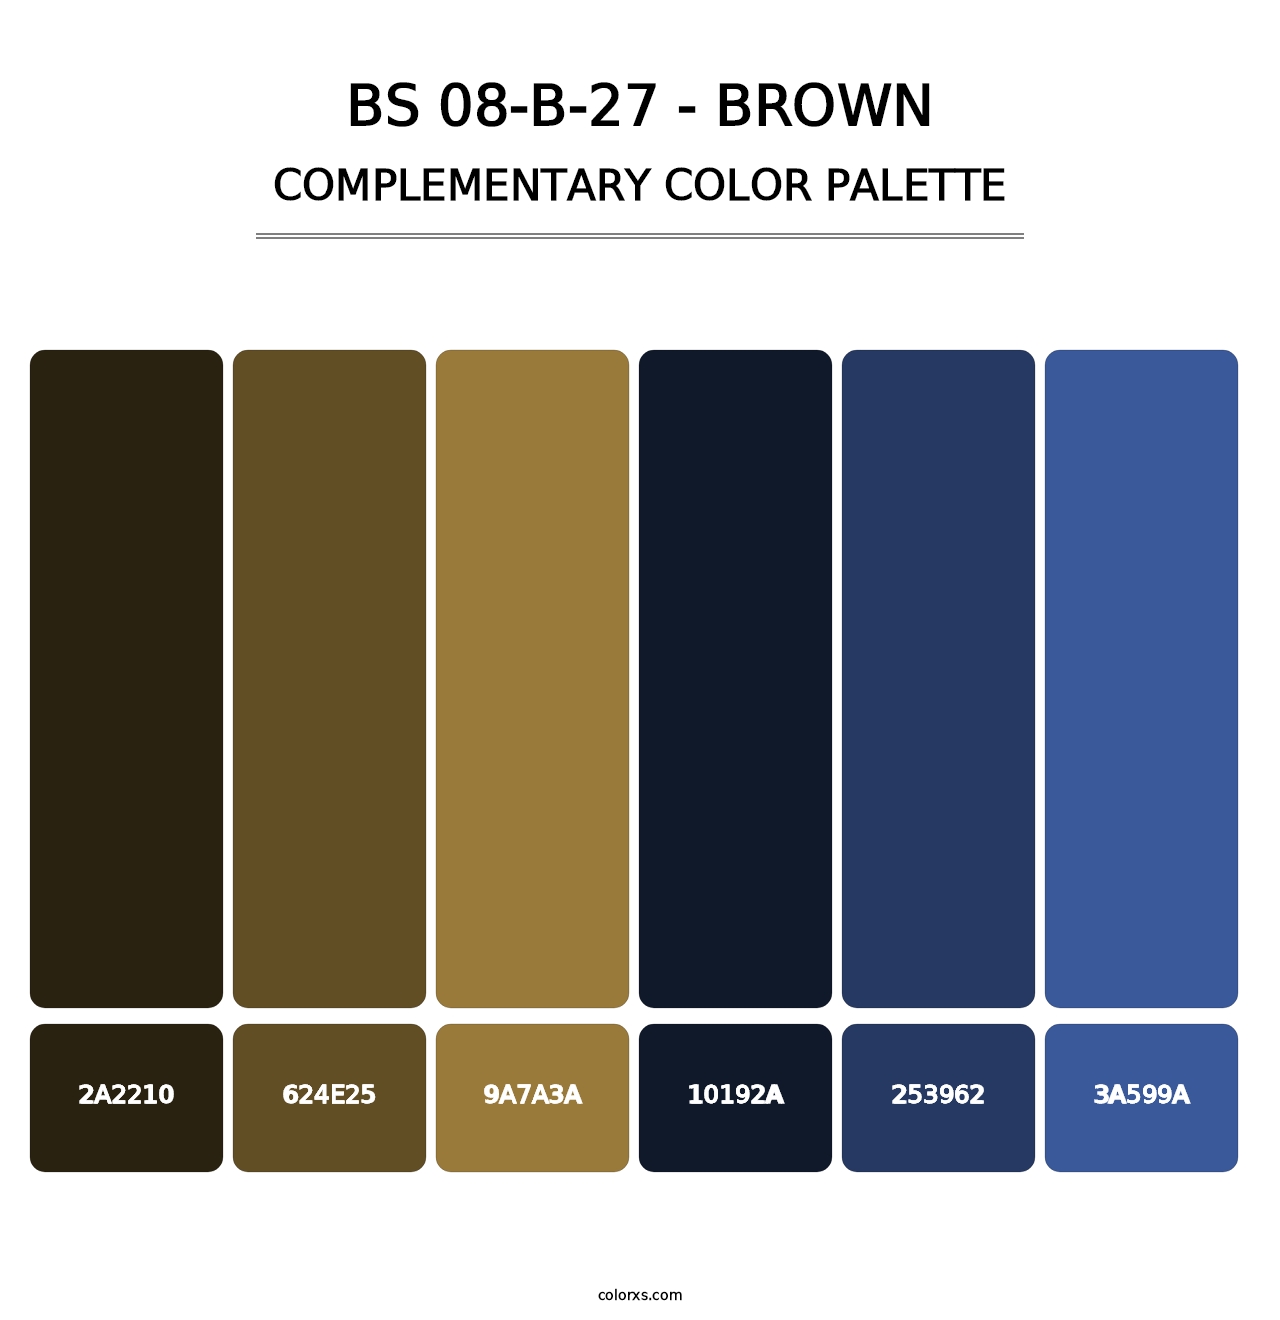 BS 08-B-27 - Brown - Complementary Color Palette